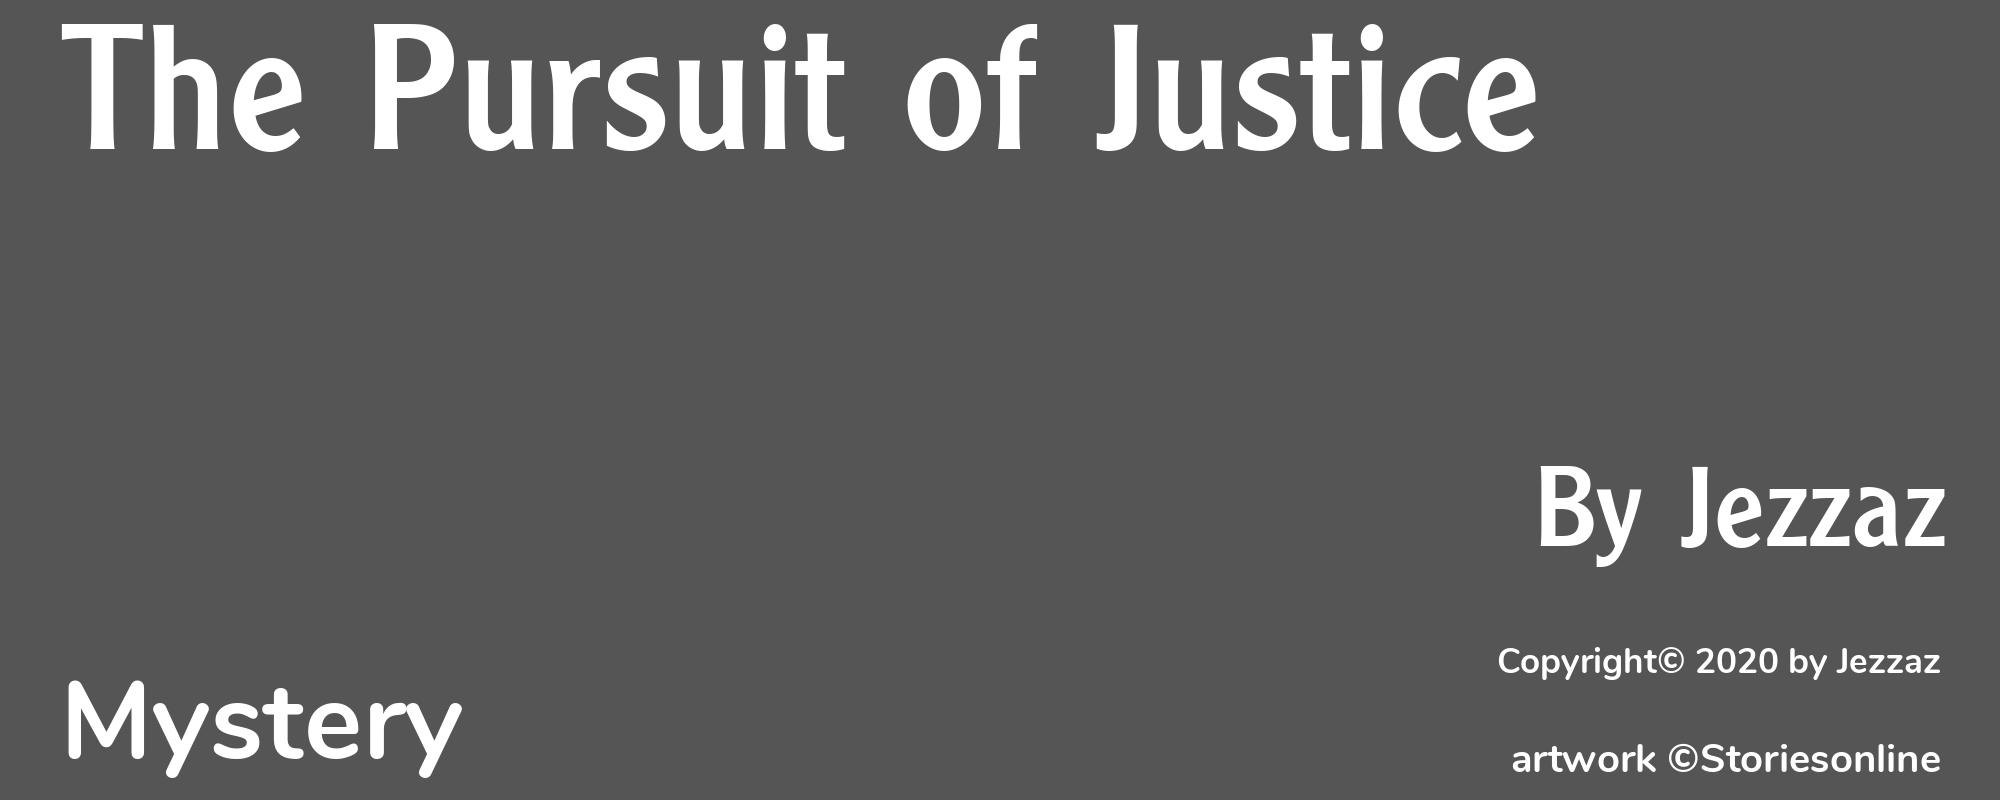 The Pursuit of Justice - Cover